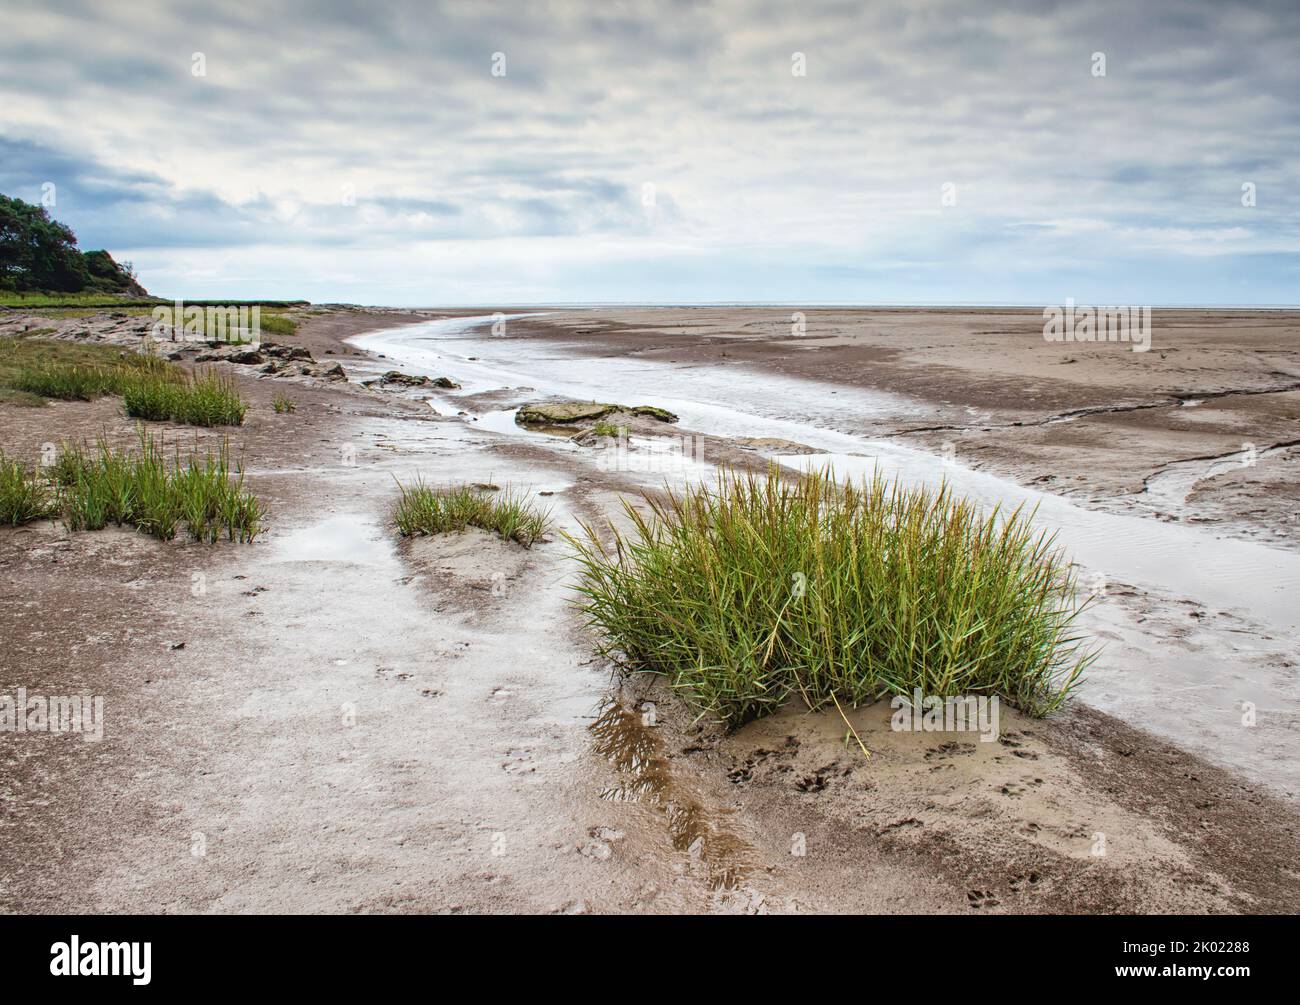 Looking along the desolate beach of Silverdale, at low tide, with sea grass in the foreground Stock Photo